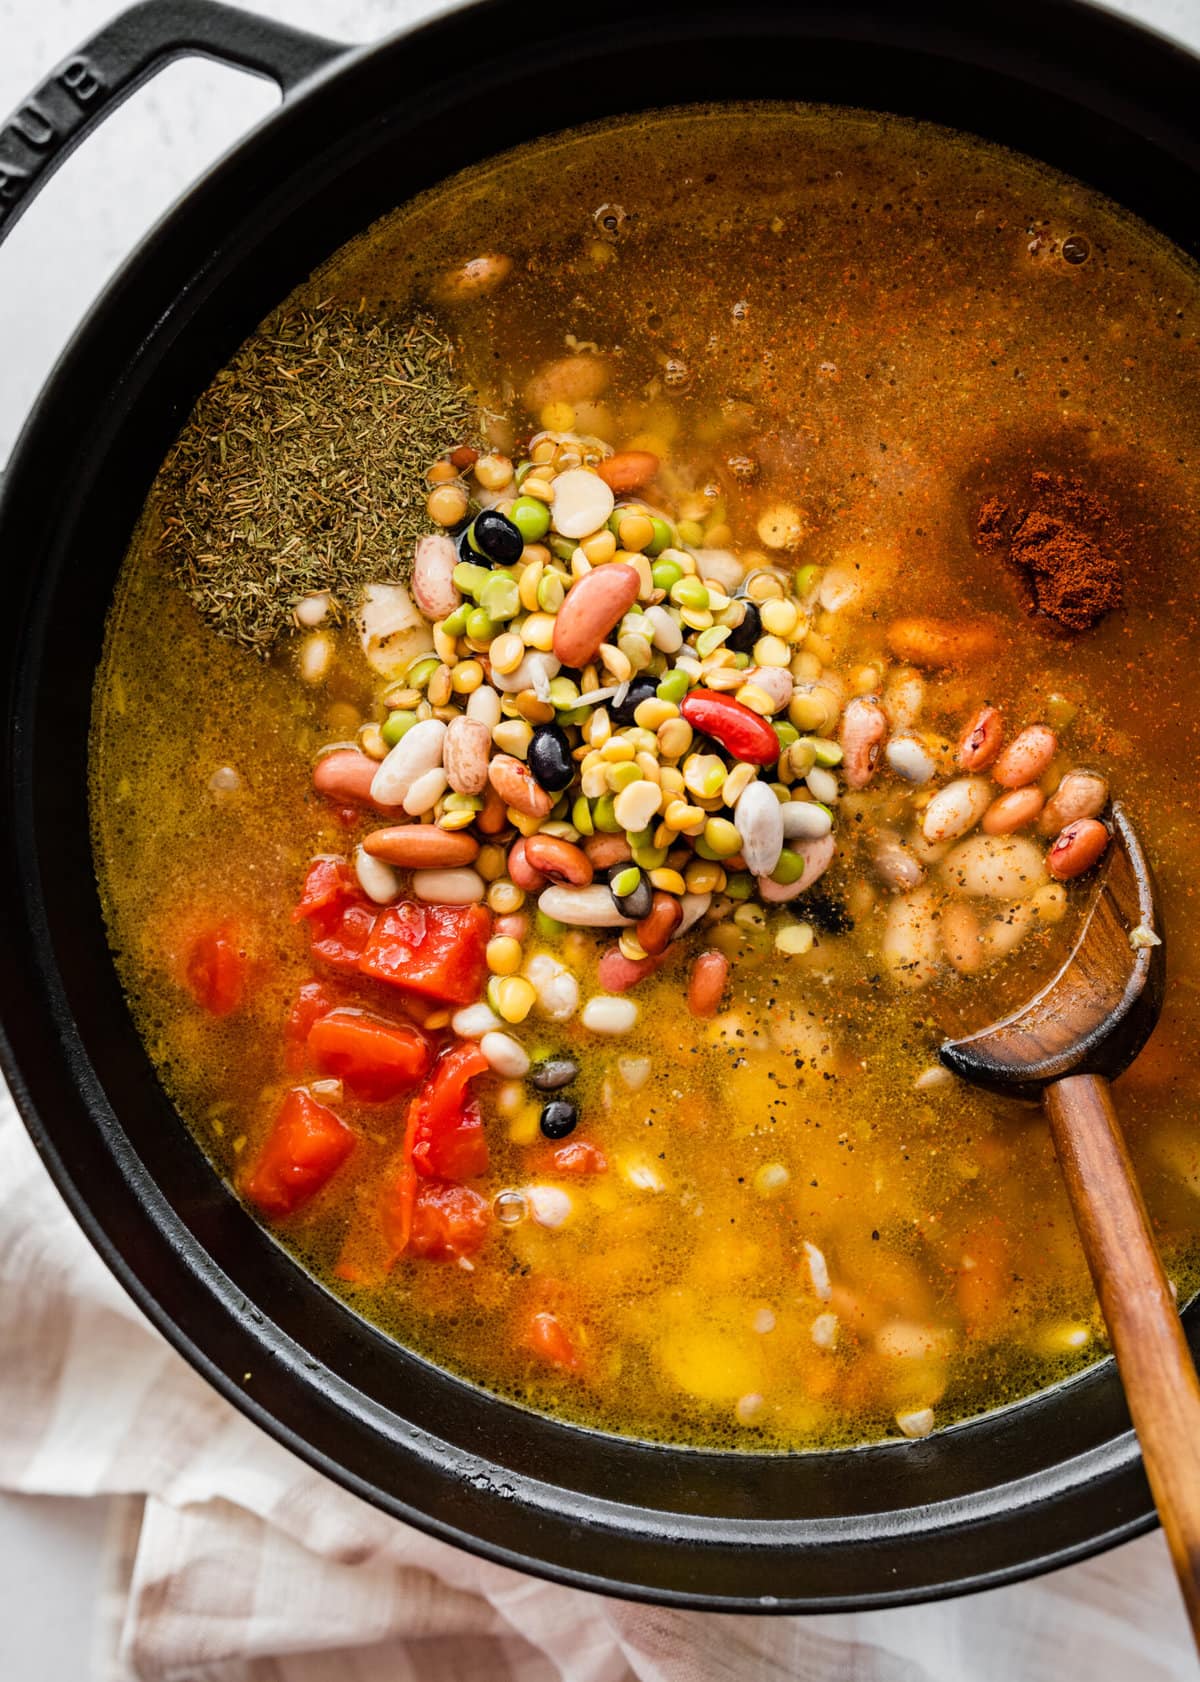 how to make 15 bean soup mix recipe with ham Step by Step: adding beans, spices, and tomatoes to the pot.